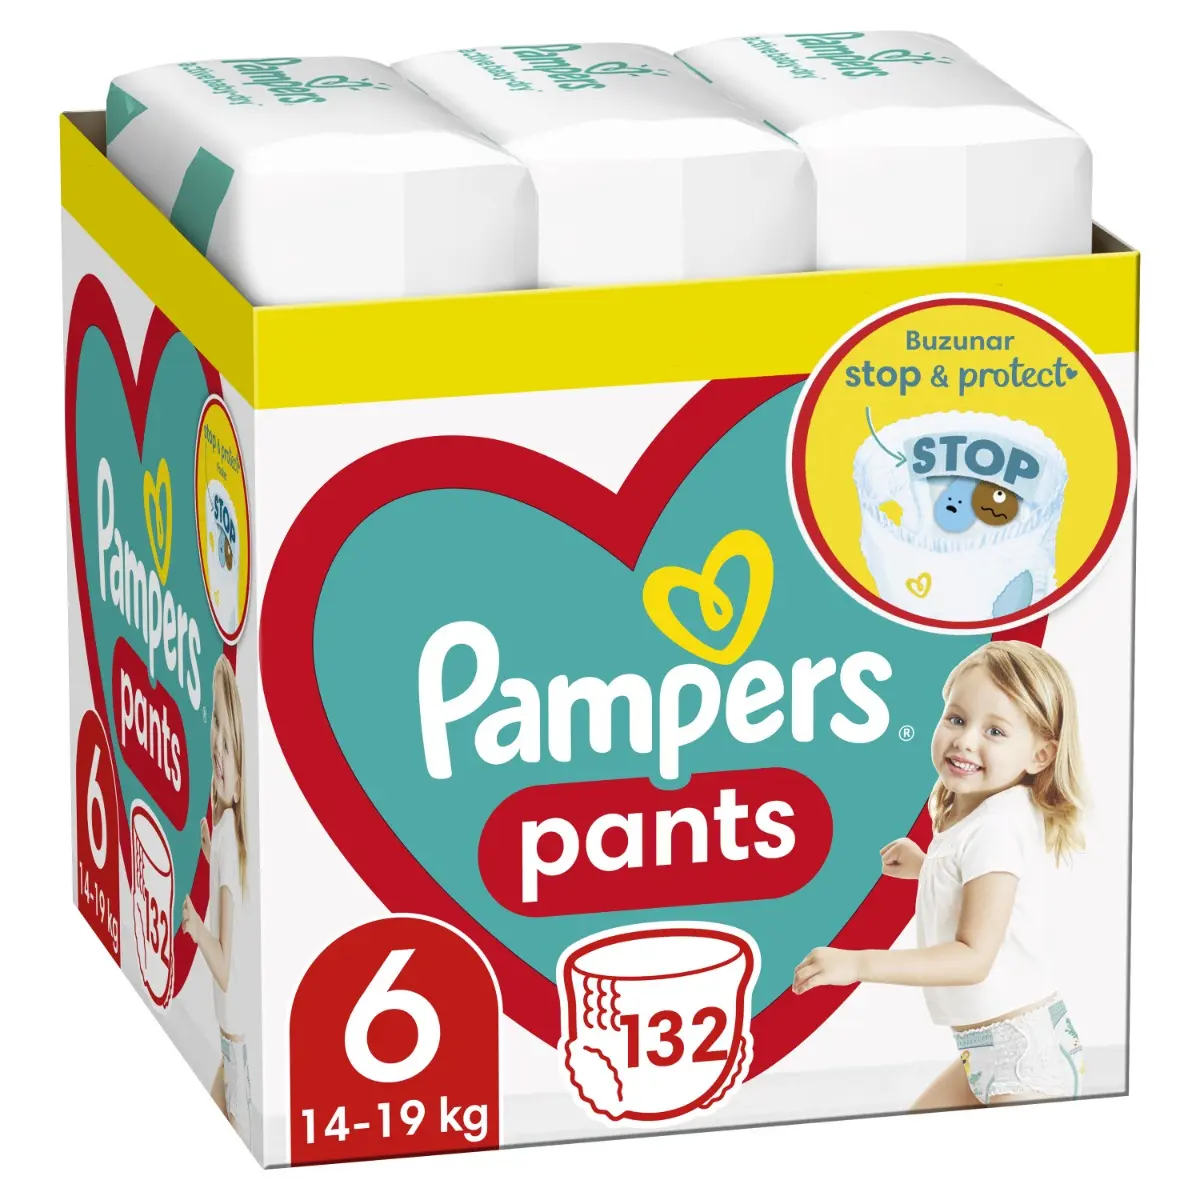 boy pampers active baby 6